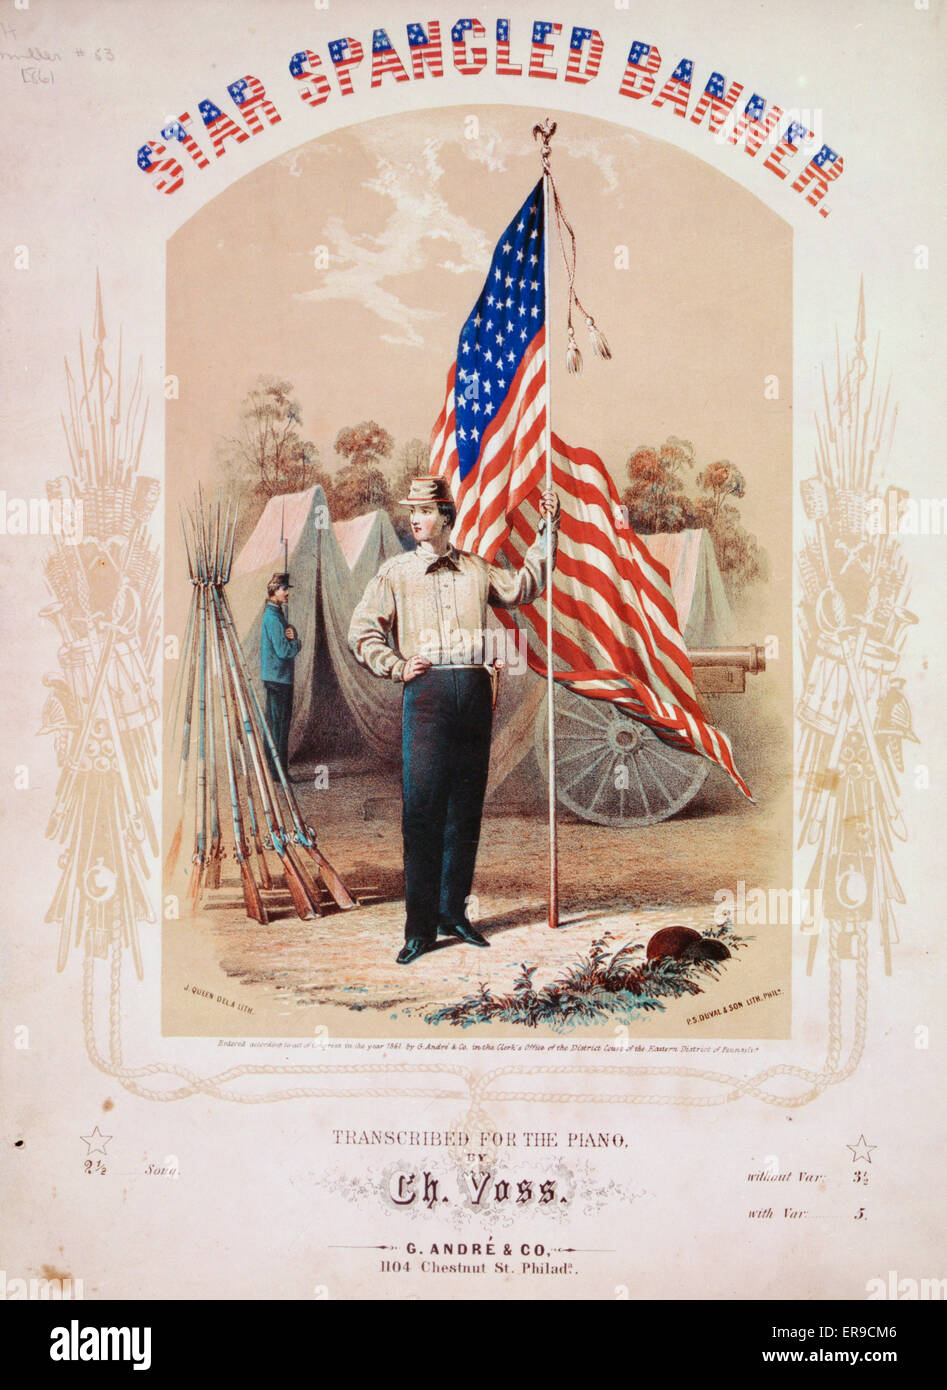 Star spangled banner Transcribed for the piano by Ch. Voss /. Sheet music for the Star Spangled Banner with illustrated cover showing a Union soldier holding the American flag at a military encampment with tents, a cannon, and rifles in the background. Da Stock Photo